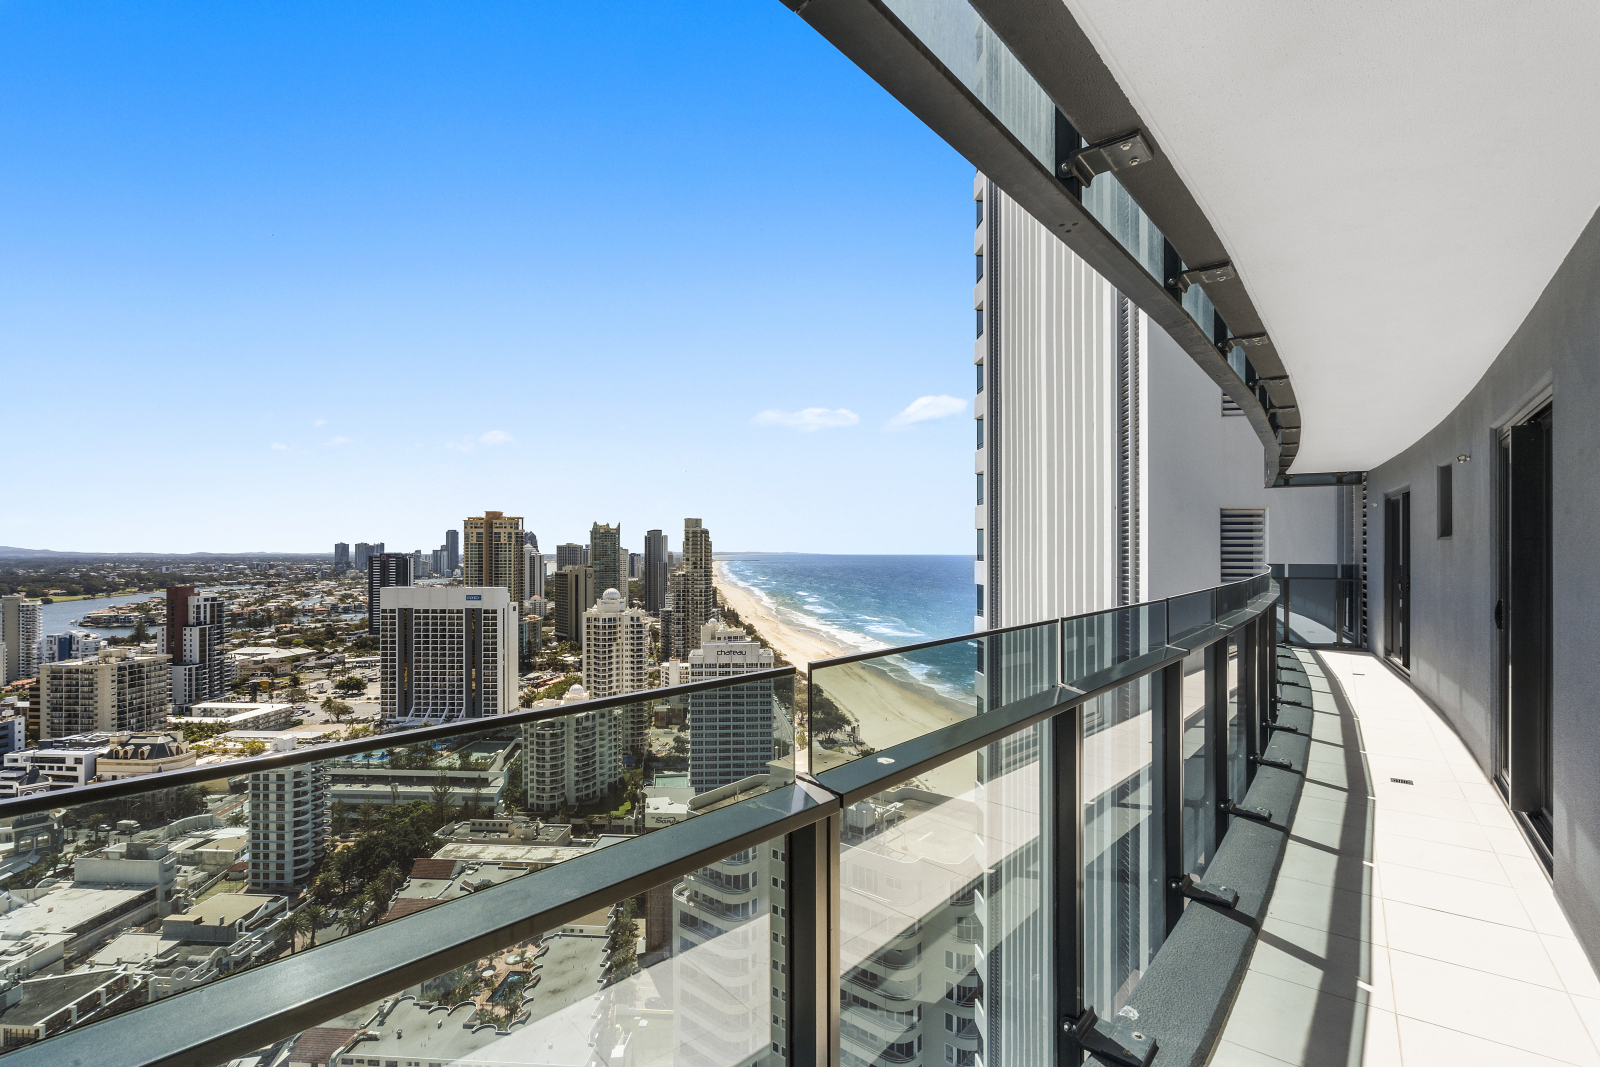 Balcony Views North over Surfers Paradise